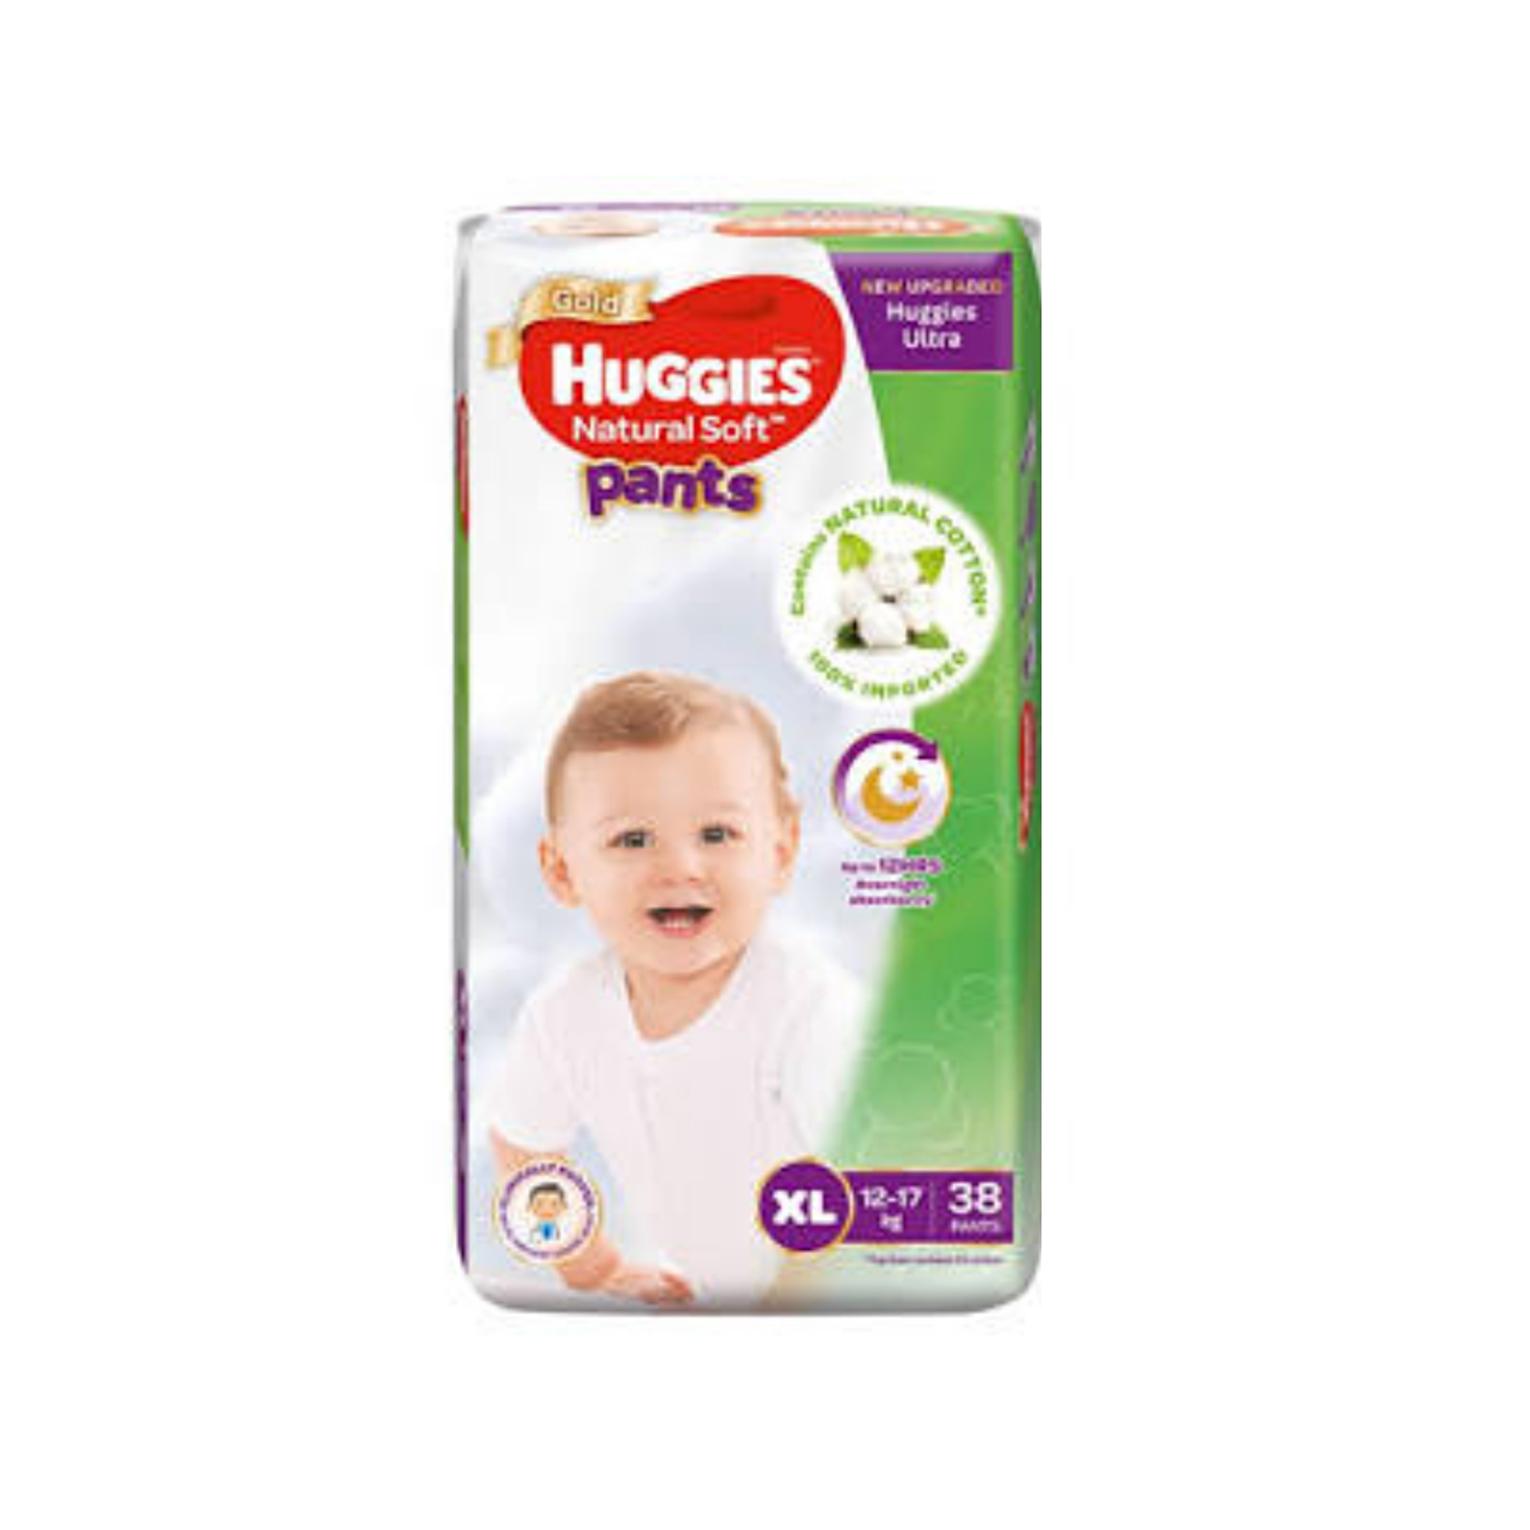 Huggies Dry Pants, Extra Large (XL) Size Baby Diaper Pants, 10 count, with  Bubble Bed Technology for comfort - RaayliHealthcare